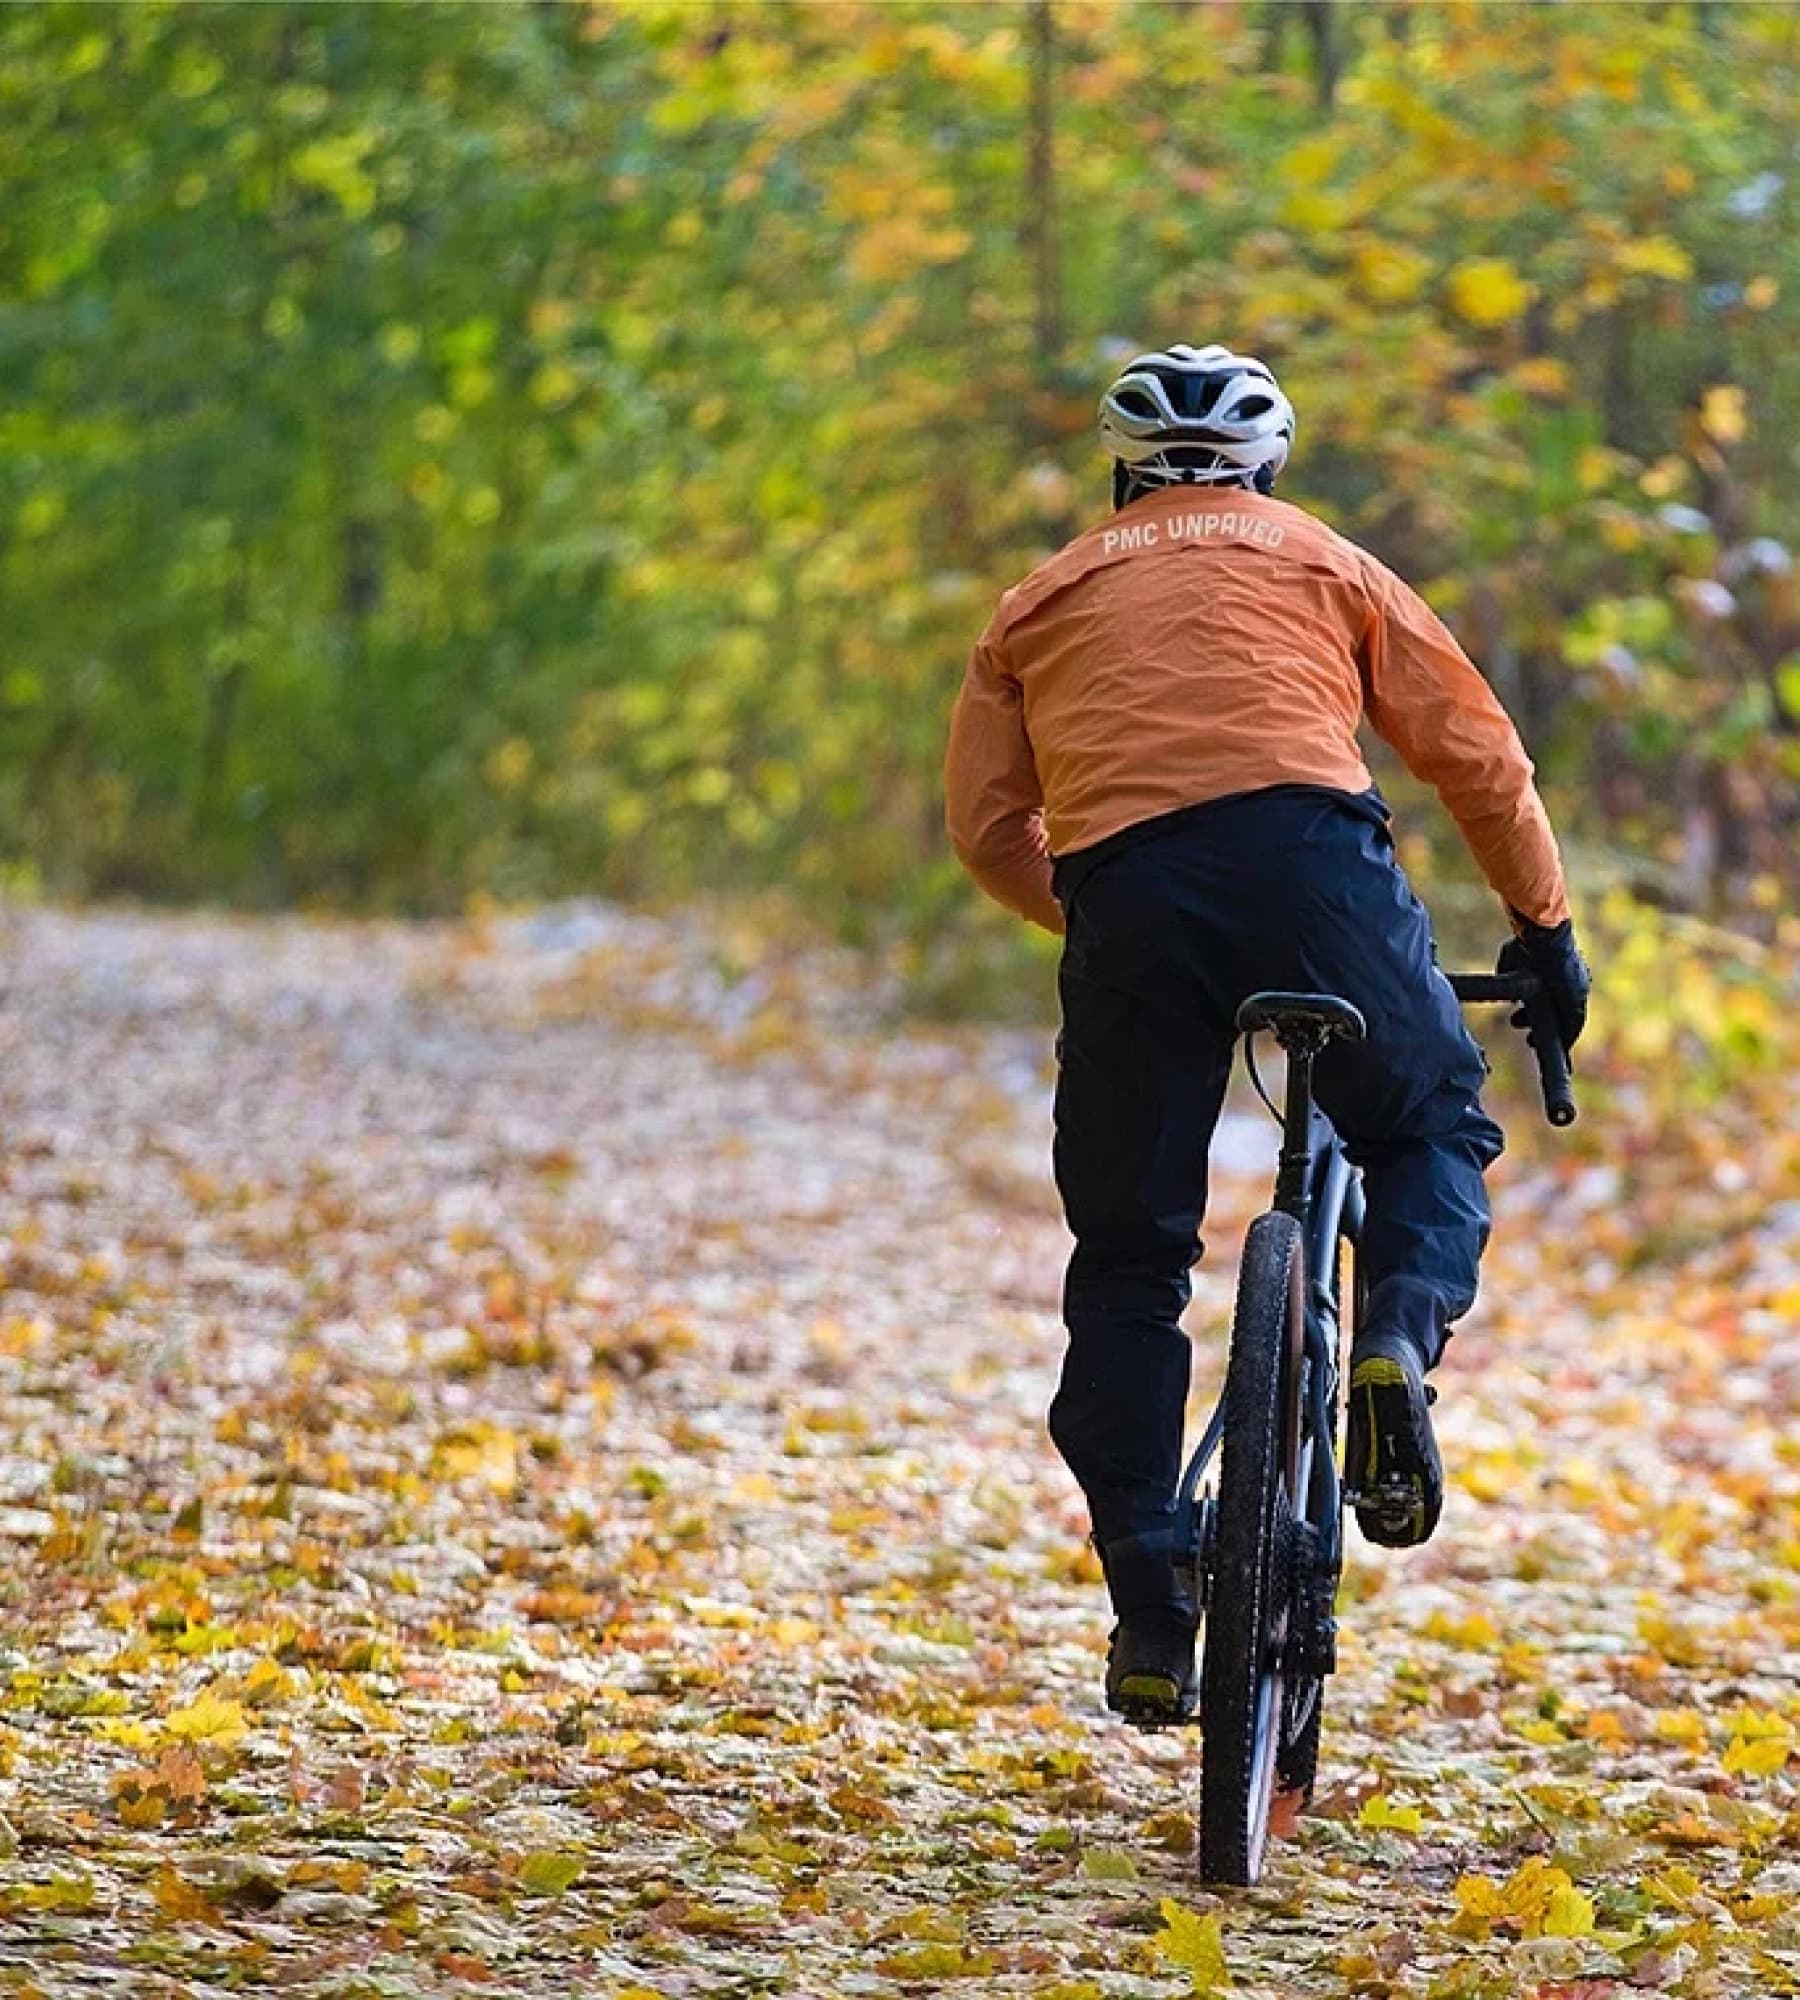 Cyclist with an orange jacket riding through a leaf covered path